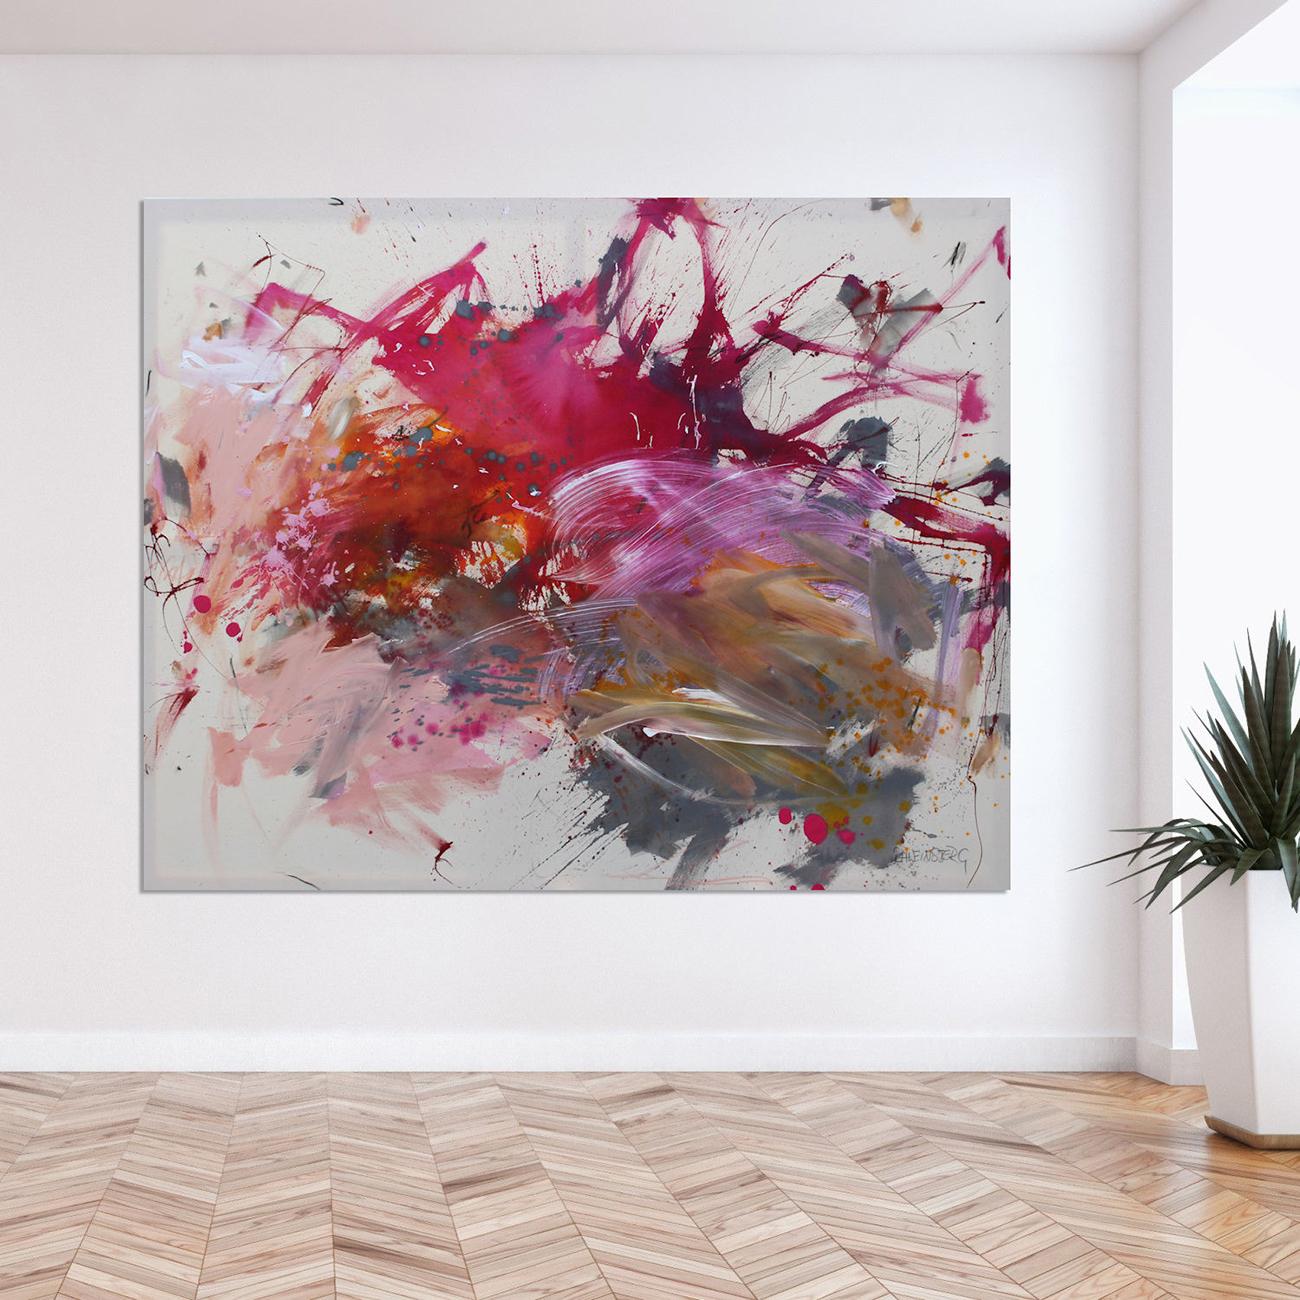 Pink Is The New Black III (Abstract painting) - Abstract Expressionist Painting by Daniela Schweinsberg